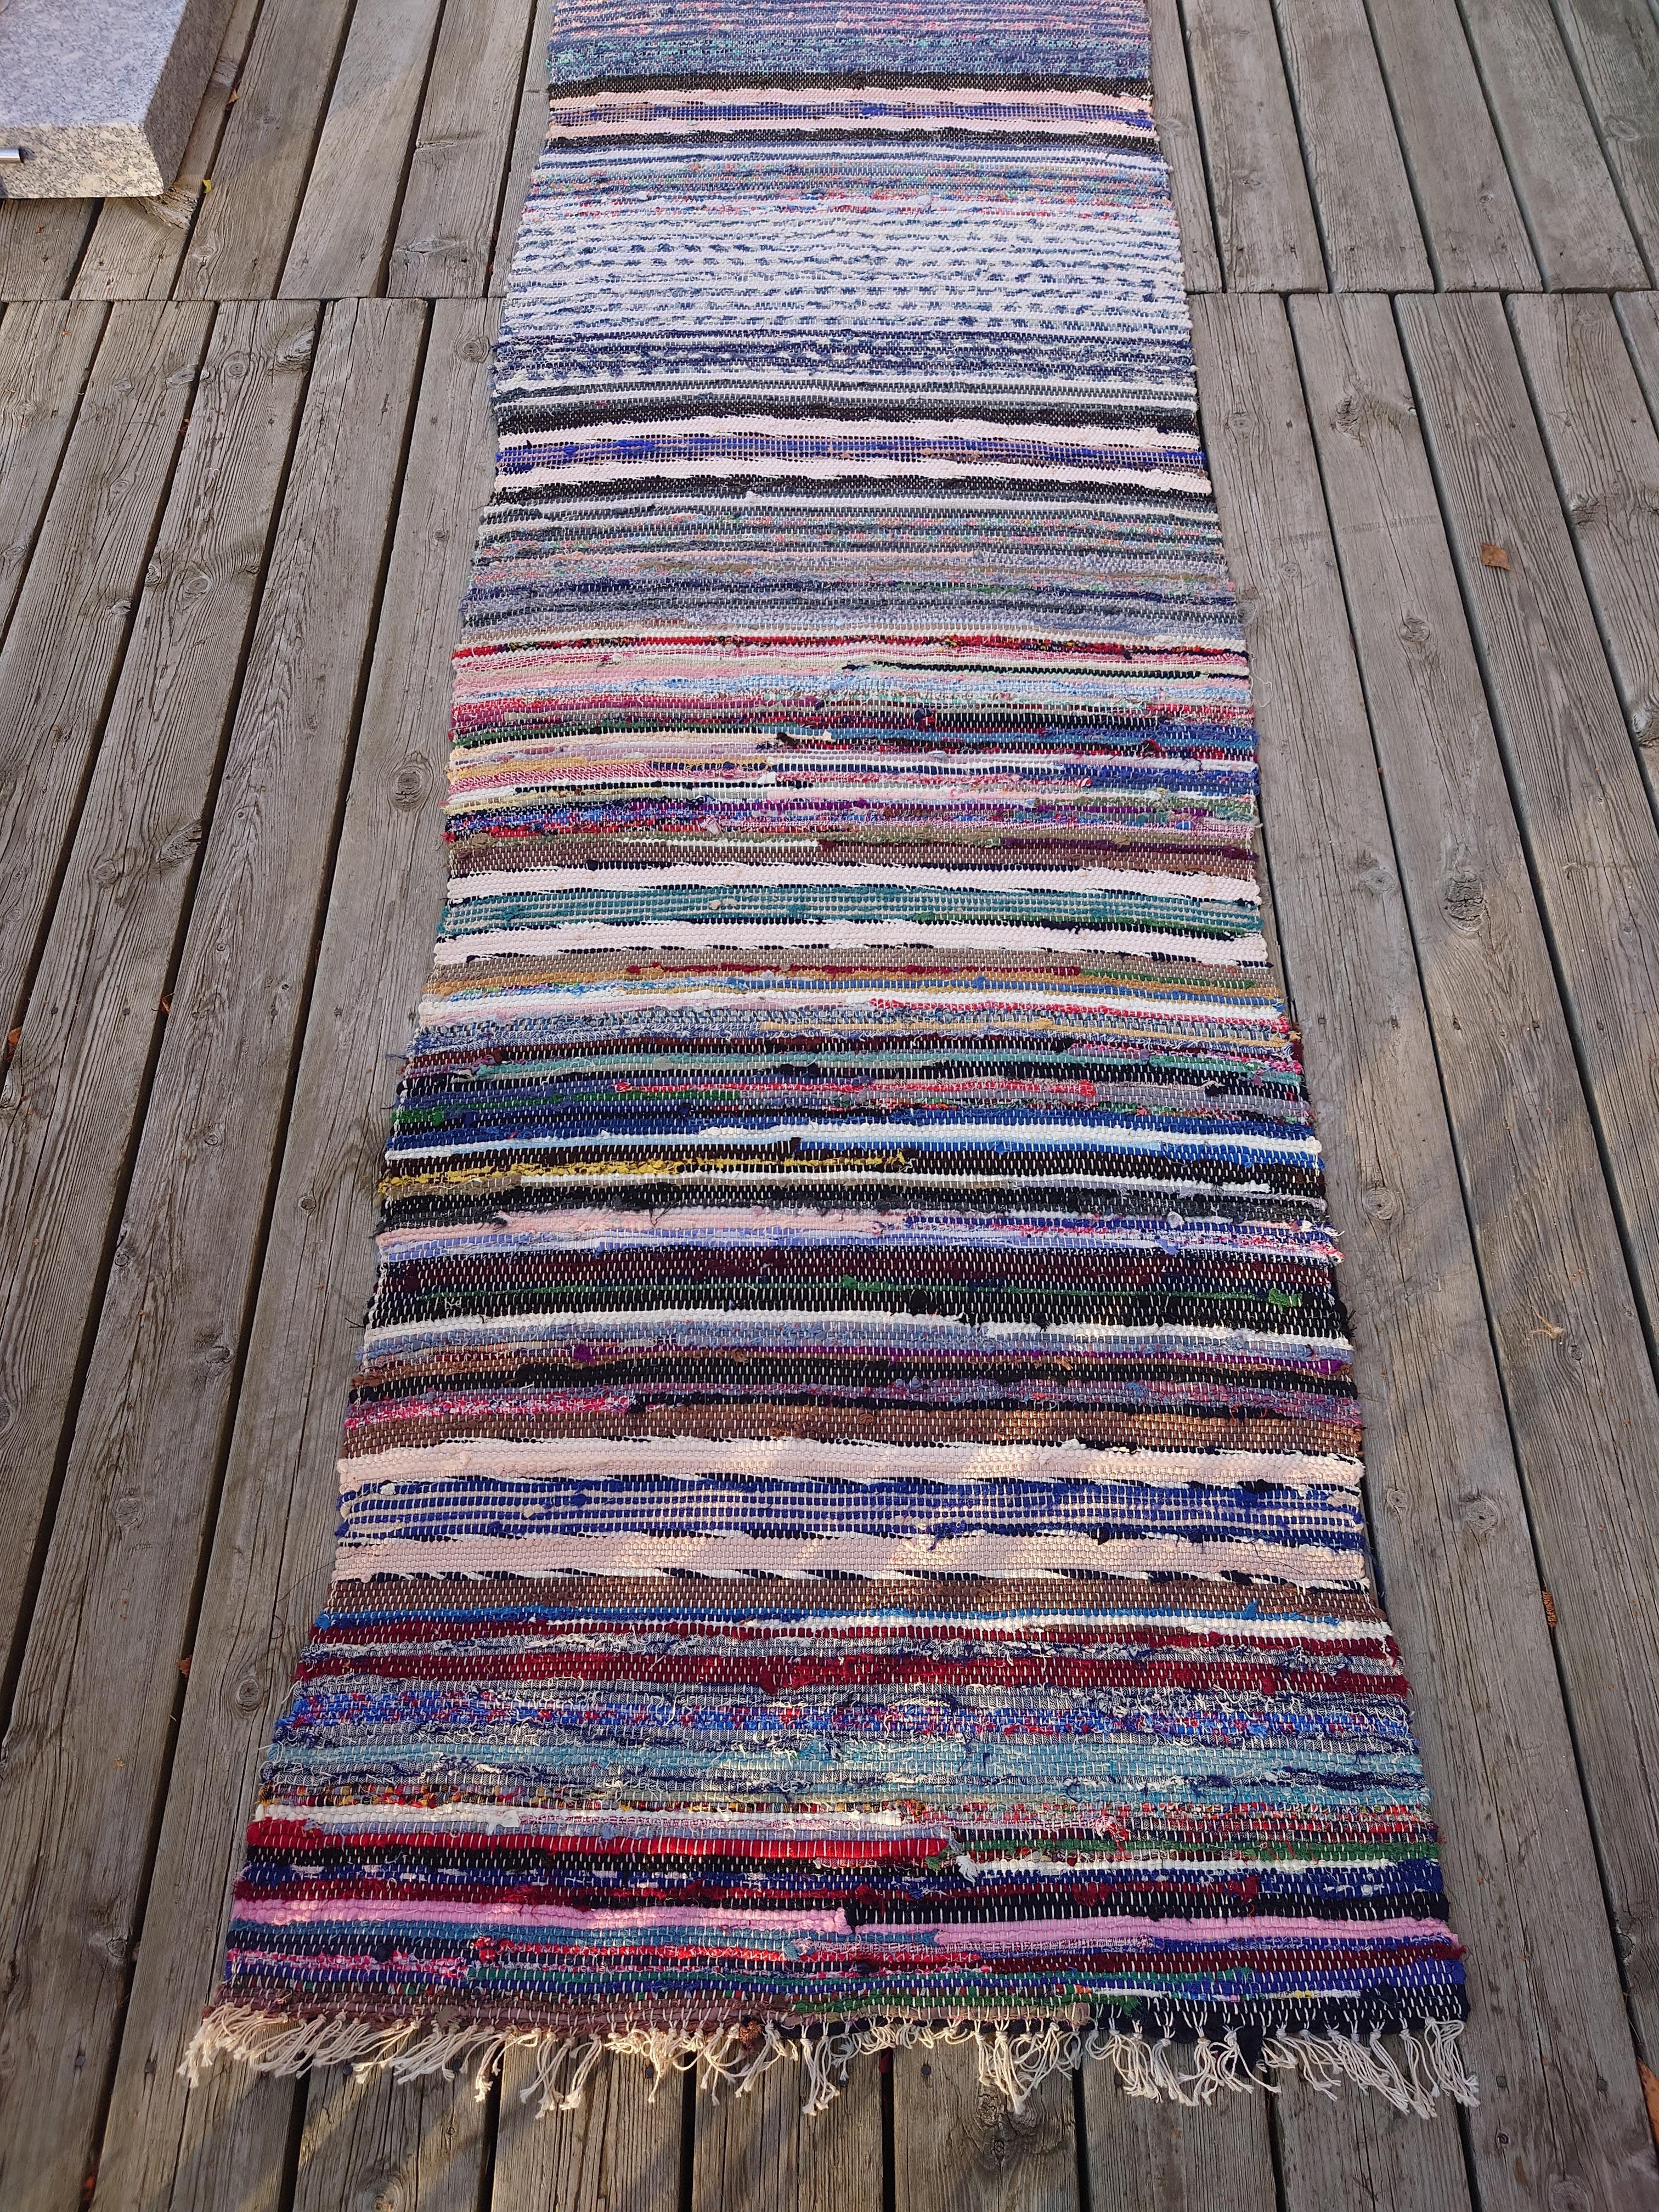  A fantastically Swedish Rag Rug in beautiful color & pattern.
Handwoven in Boden Northern Sweden .
The rug is freshly washed.
Vintage & antique Swedish Rag Rugs from Sweden comes in a variety of color shemes and patterns. They are woven traditional